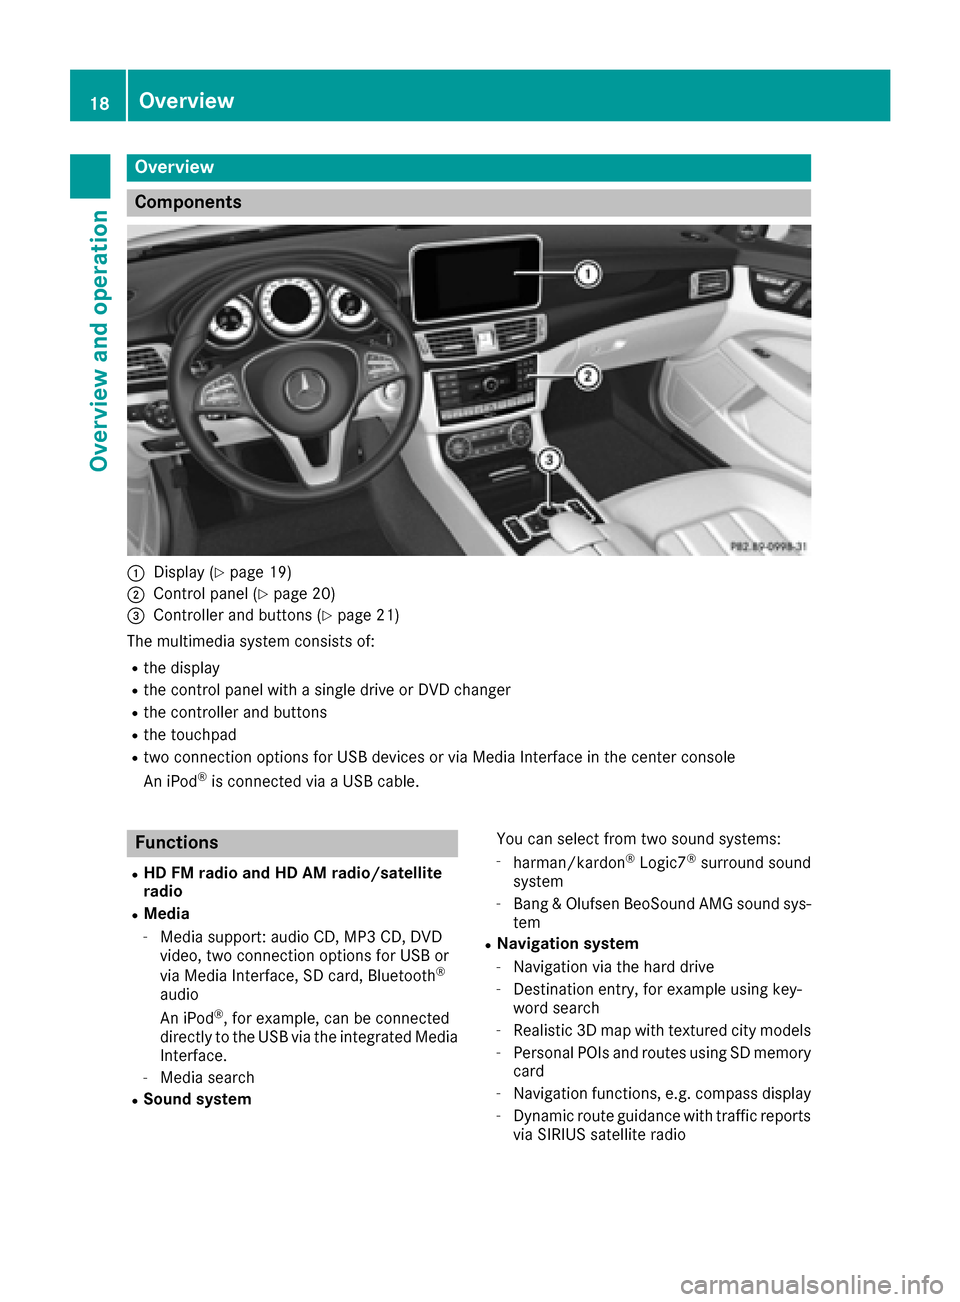 MERCEDES-BENZ SLC-Class 2017 R172 Comand Manual Overview
Components
:Display (Ypage 19)
;Control panel (Ypage 20)
=Controller and buttons (Ypage 21)
The multimedia system consists of:
Rthe display
Rthe control panel with a single drive or DVD chang